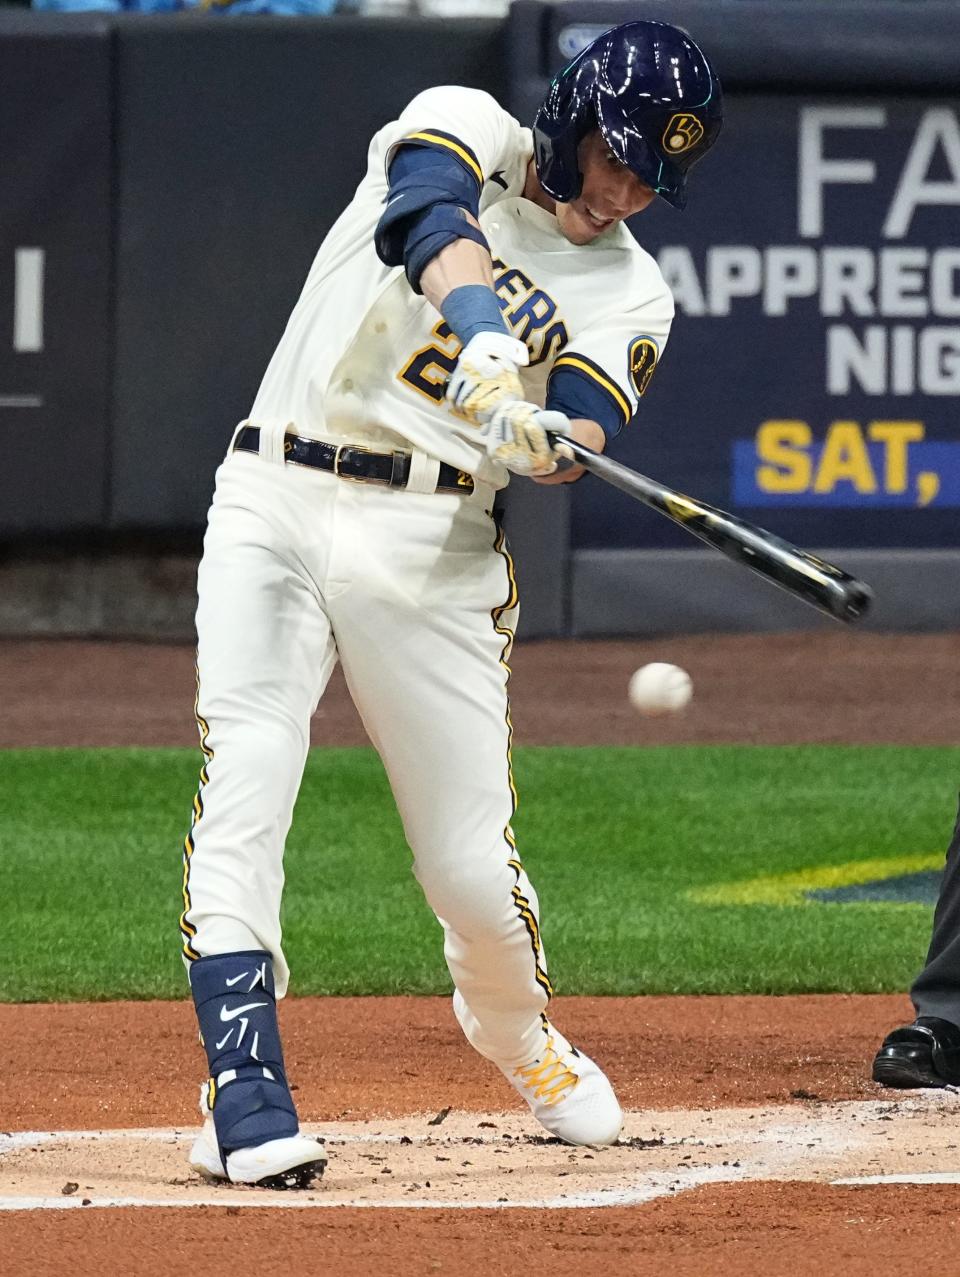 Christian Yelich had two of the best season's in franchise history according to advanced statistics.